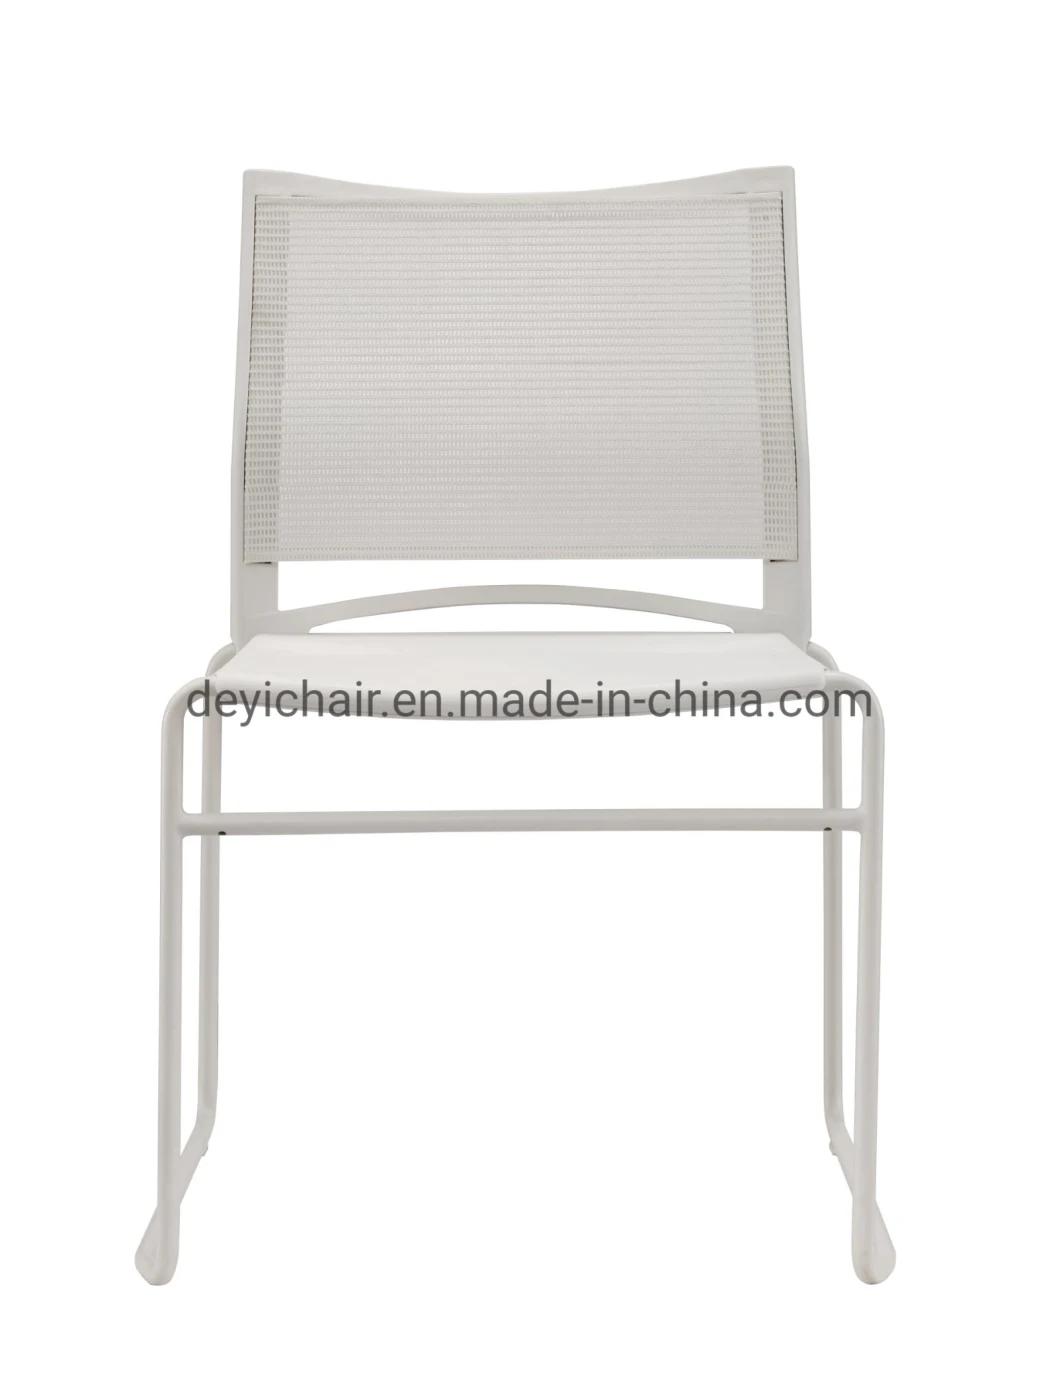 White Color Plastic Shell Seat Cushion Optional New Design White Color Coated Frame Stool Chair